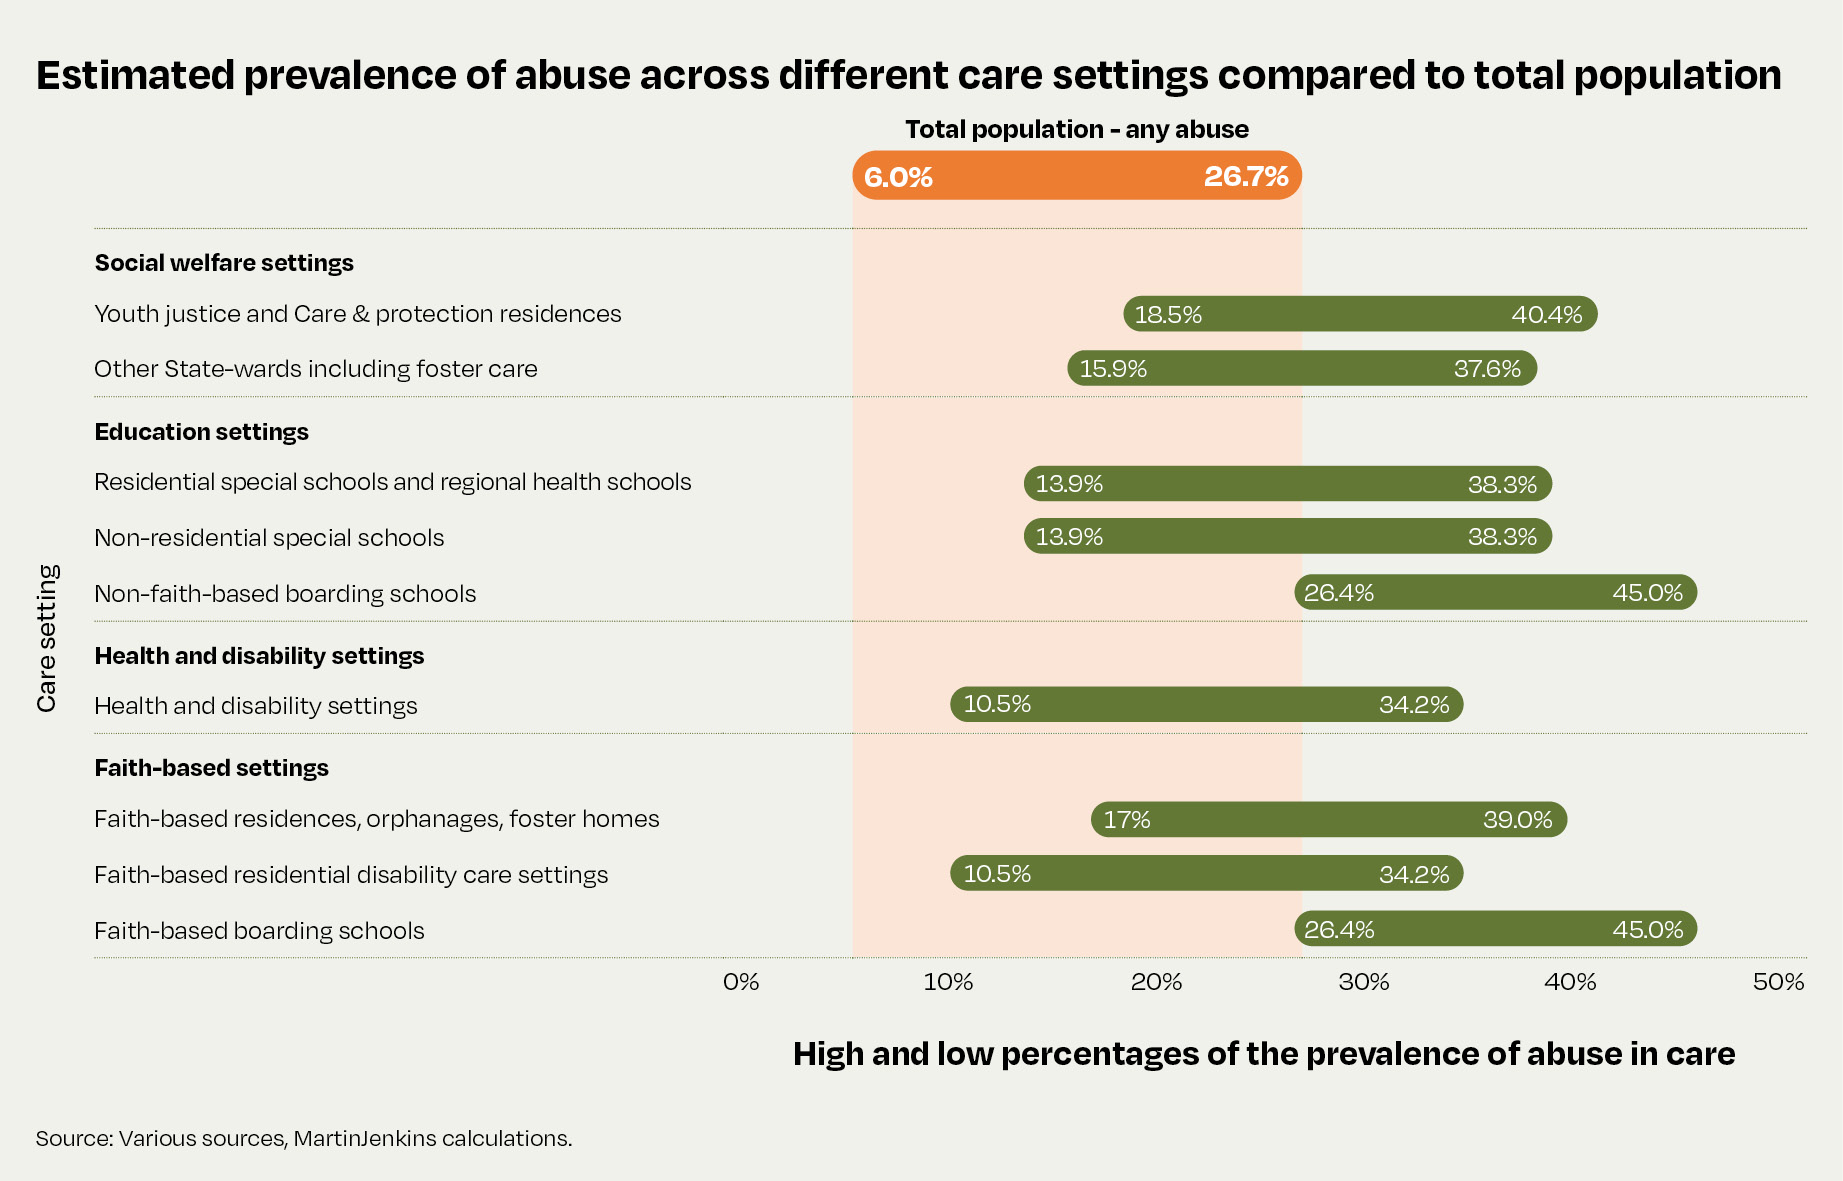 This graph shows estimates of the prevalence of abuse across different settings compared to total population. Prevalence of abuse in youth justice and Care and protection residences was estimated to be a low of 18.5 percent and a high of 40.4 percent. For other State wards including foster care it was estimated to be between 15.9 percent and 37.6 percent. In residential and non-residential special schools and regional health schools it was estimated to be between 13.9 percent and 38.3 percent. In non-faith-based boarding schools it was estimated to be between 26.4 percent and 45 percent. In health and disability settings it was estimated to be between 10.5 percent and 34.2 percent. In faith-based residences, orphanages and foster homes it was estimated to be between 17 percent and 39 percent. In faith-based residential disability care settings it was estimated to be between 10.5 percent and 34.2 percent. In faith-based boarding schools it was estimated to be between 26.4 percent and 45 percent. This is compared to the prevalence of abuse in the total population, which is between 6 percent and 26.7 percent. 